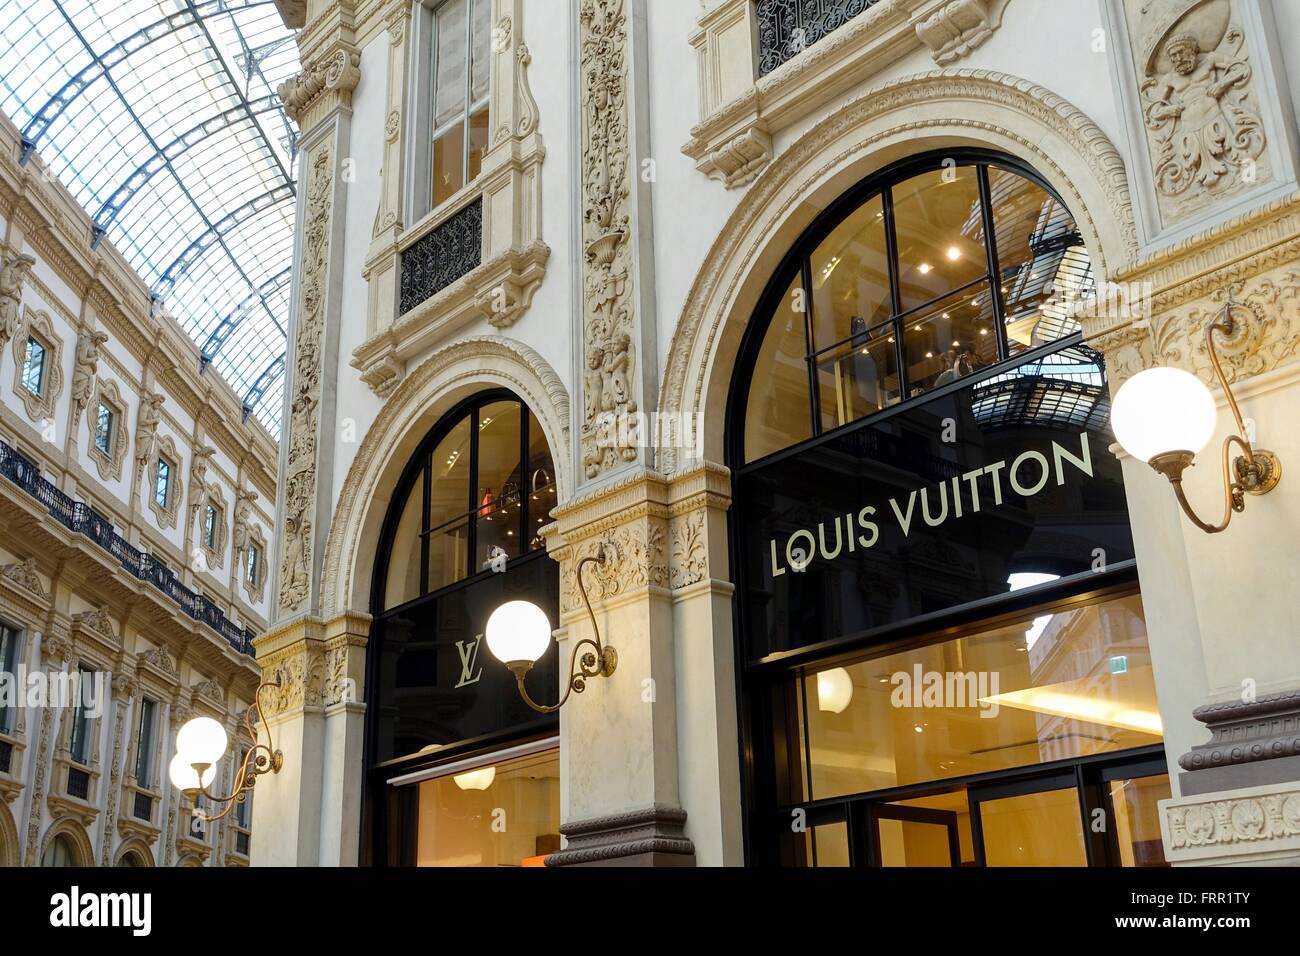 Louis Vuitton Store at the Galleria in Edina, Minnesota Editorial Photo -  Image of building, accessories: 101725476